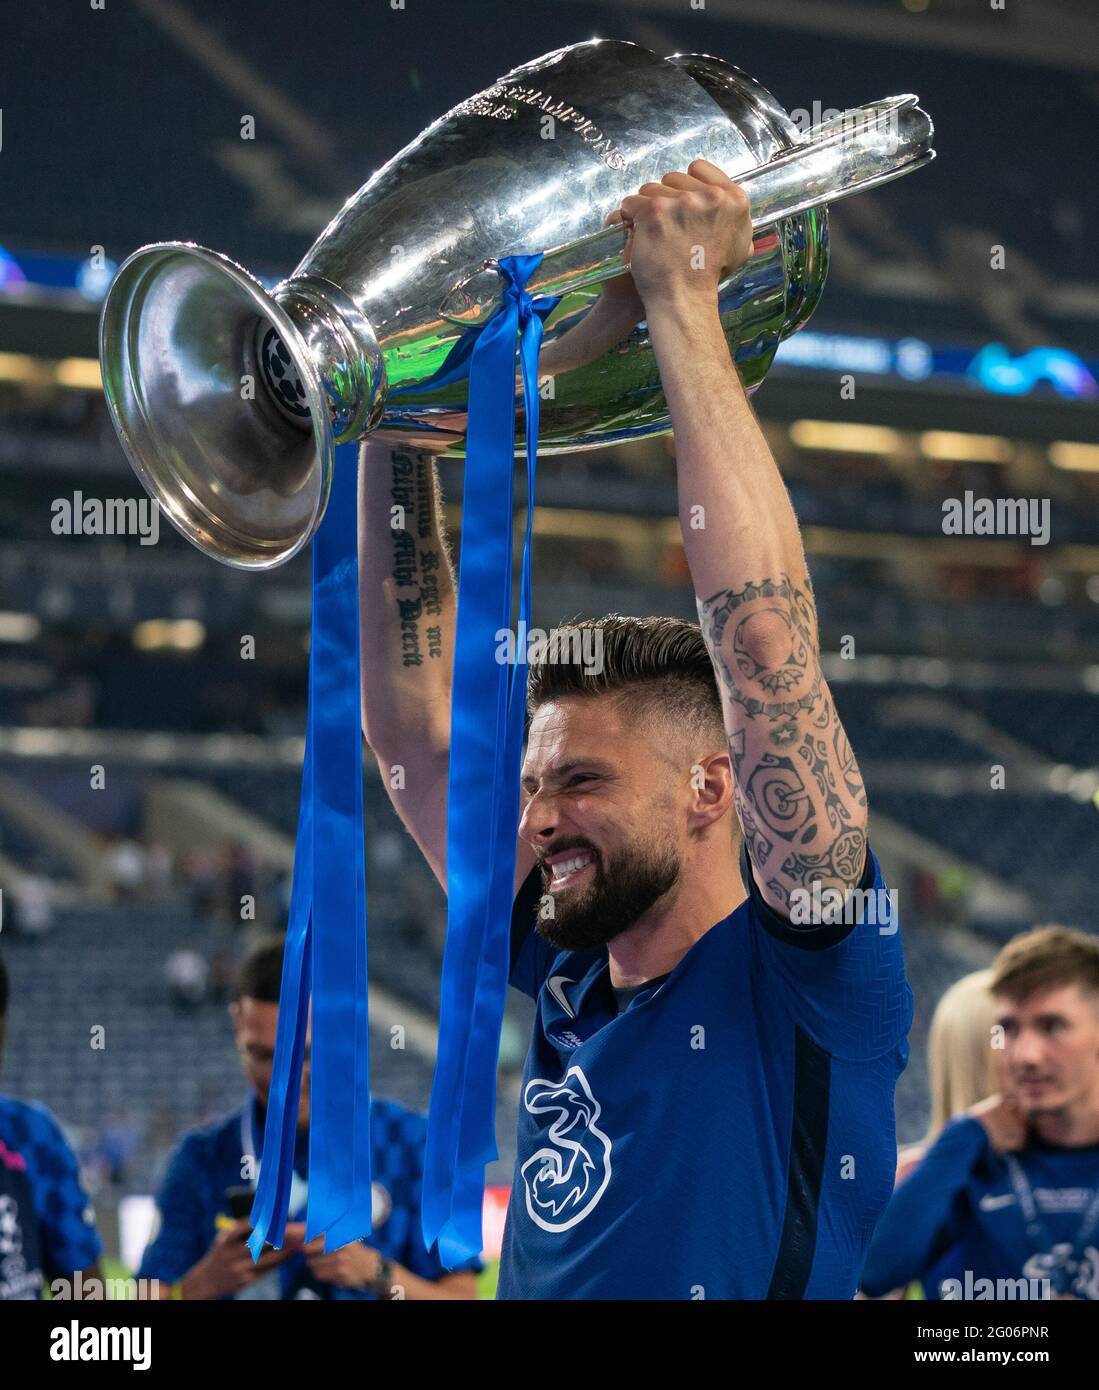 Ryal Quay Uk 29th May 21 Olivier Giroud Of Chelsea Lifts The Winning Trophy Following The Uefa Champions League Final Match Between Manchester City And Chelsea At The Est Dio Do Drag O Porto